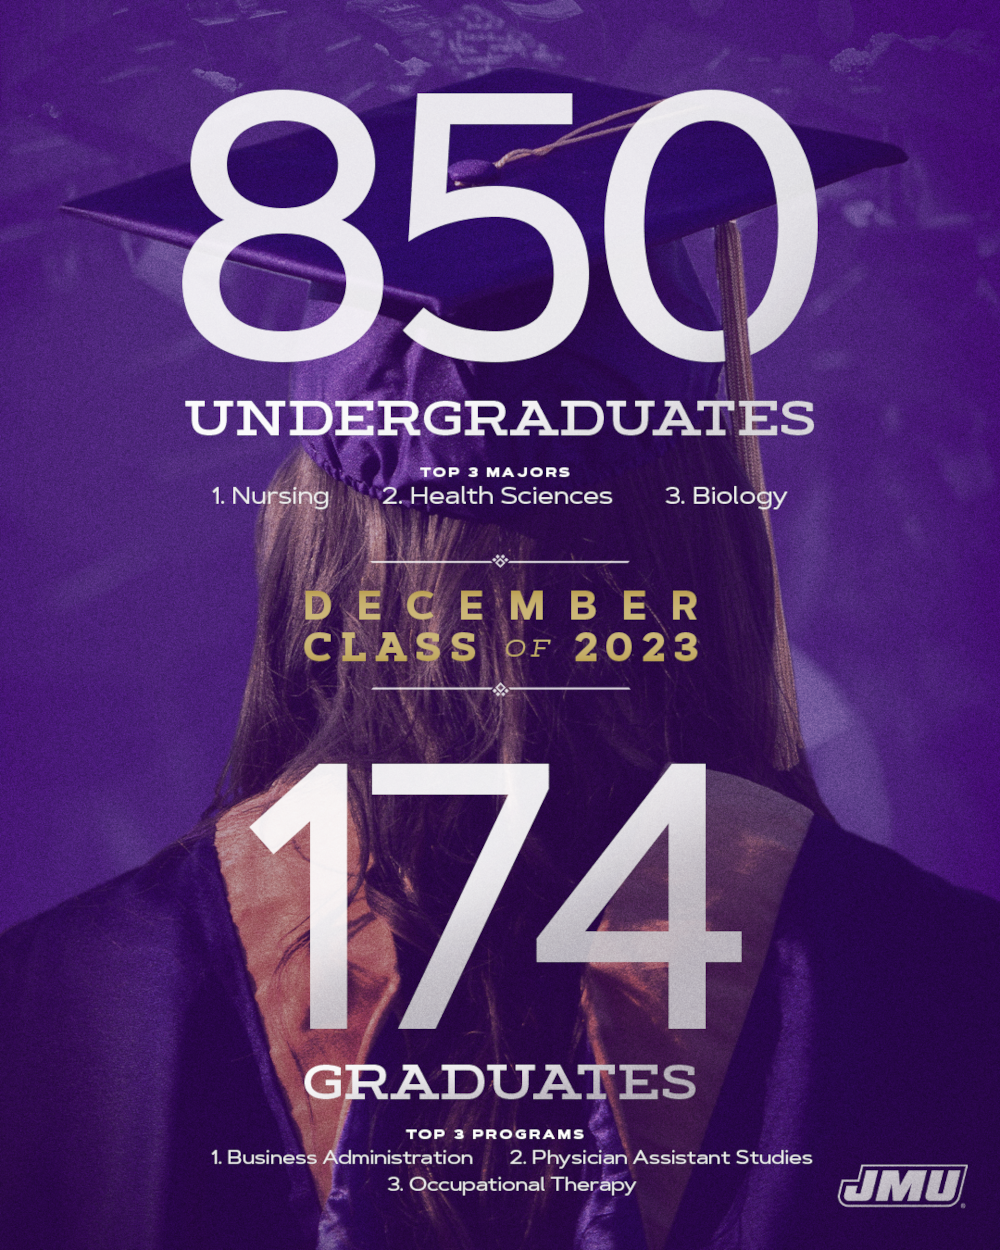 2023 winter commencement graphic